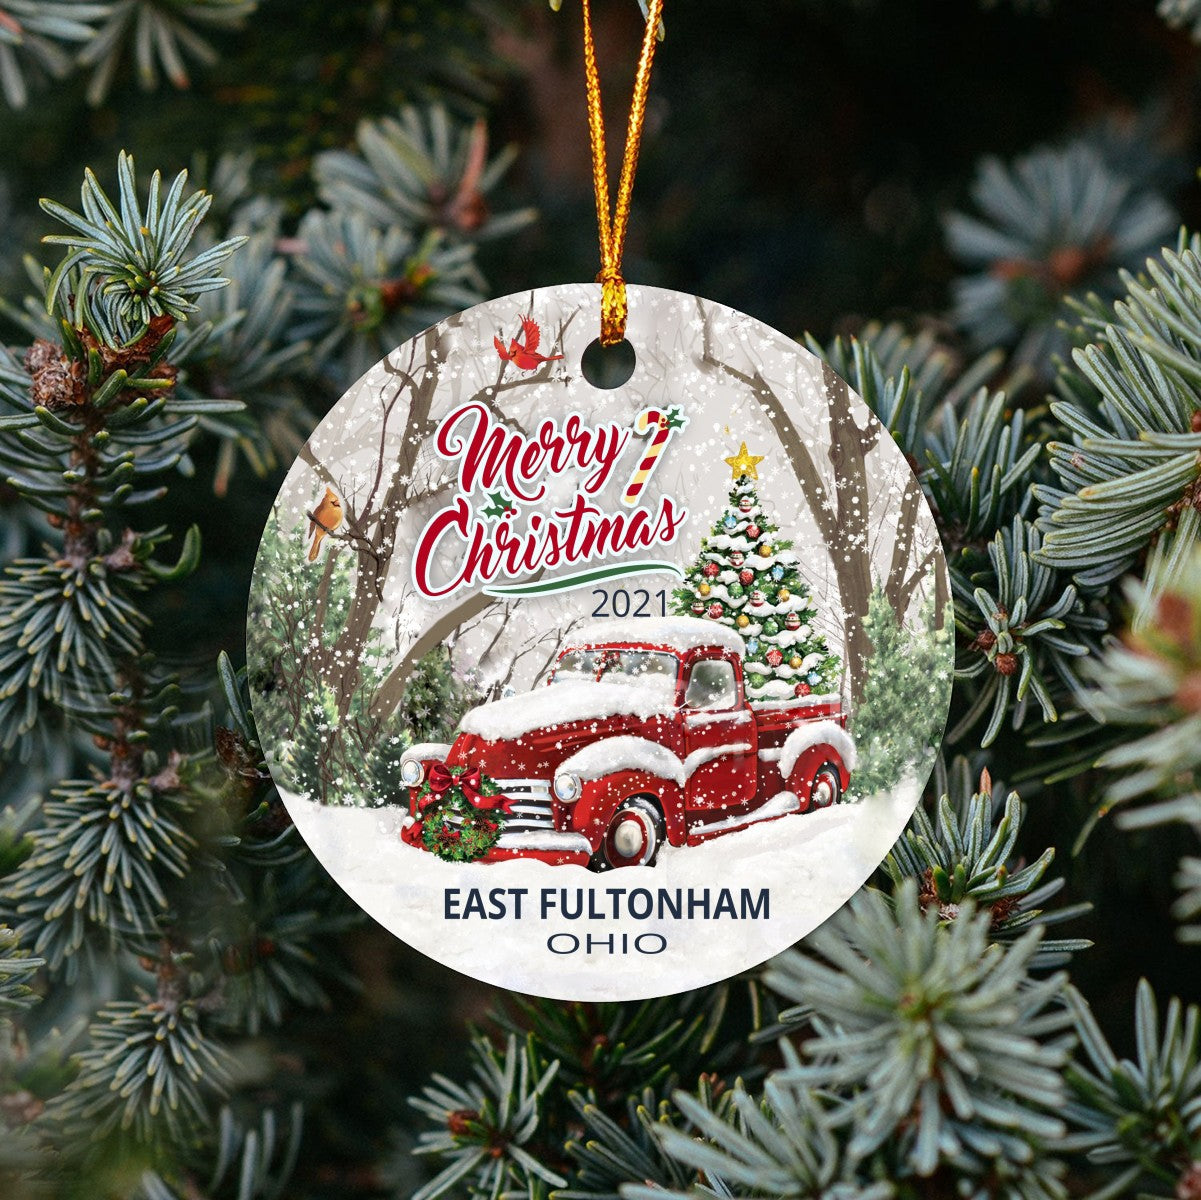 Christmas Tree Ornaments East Fultonham - Ornament With Name City, State East Fultonham Ohio OH Ornament - Red Truck Xmas Ornaments 3'' Plastic Gift For Family, Friend And Housewarming